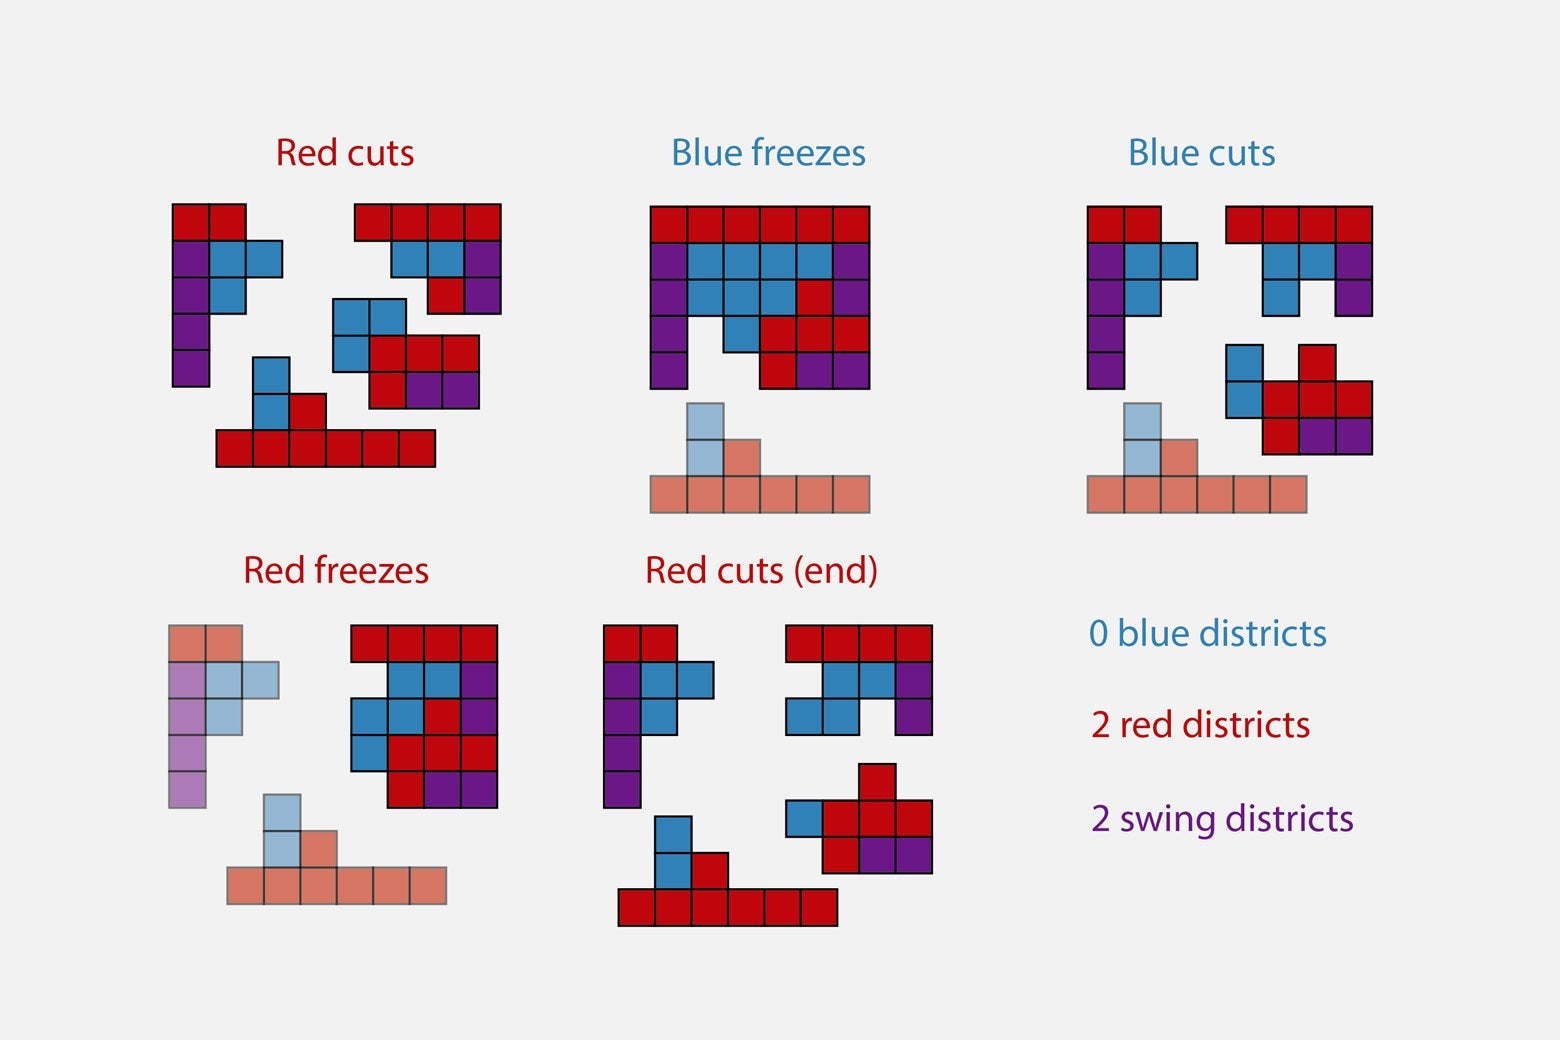 Red cuts, blue freezes, blue cuts, red freezes, red cuts, resulting in: 0 blue districts, 2 red districts, 2 swing districts.